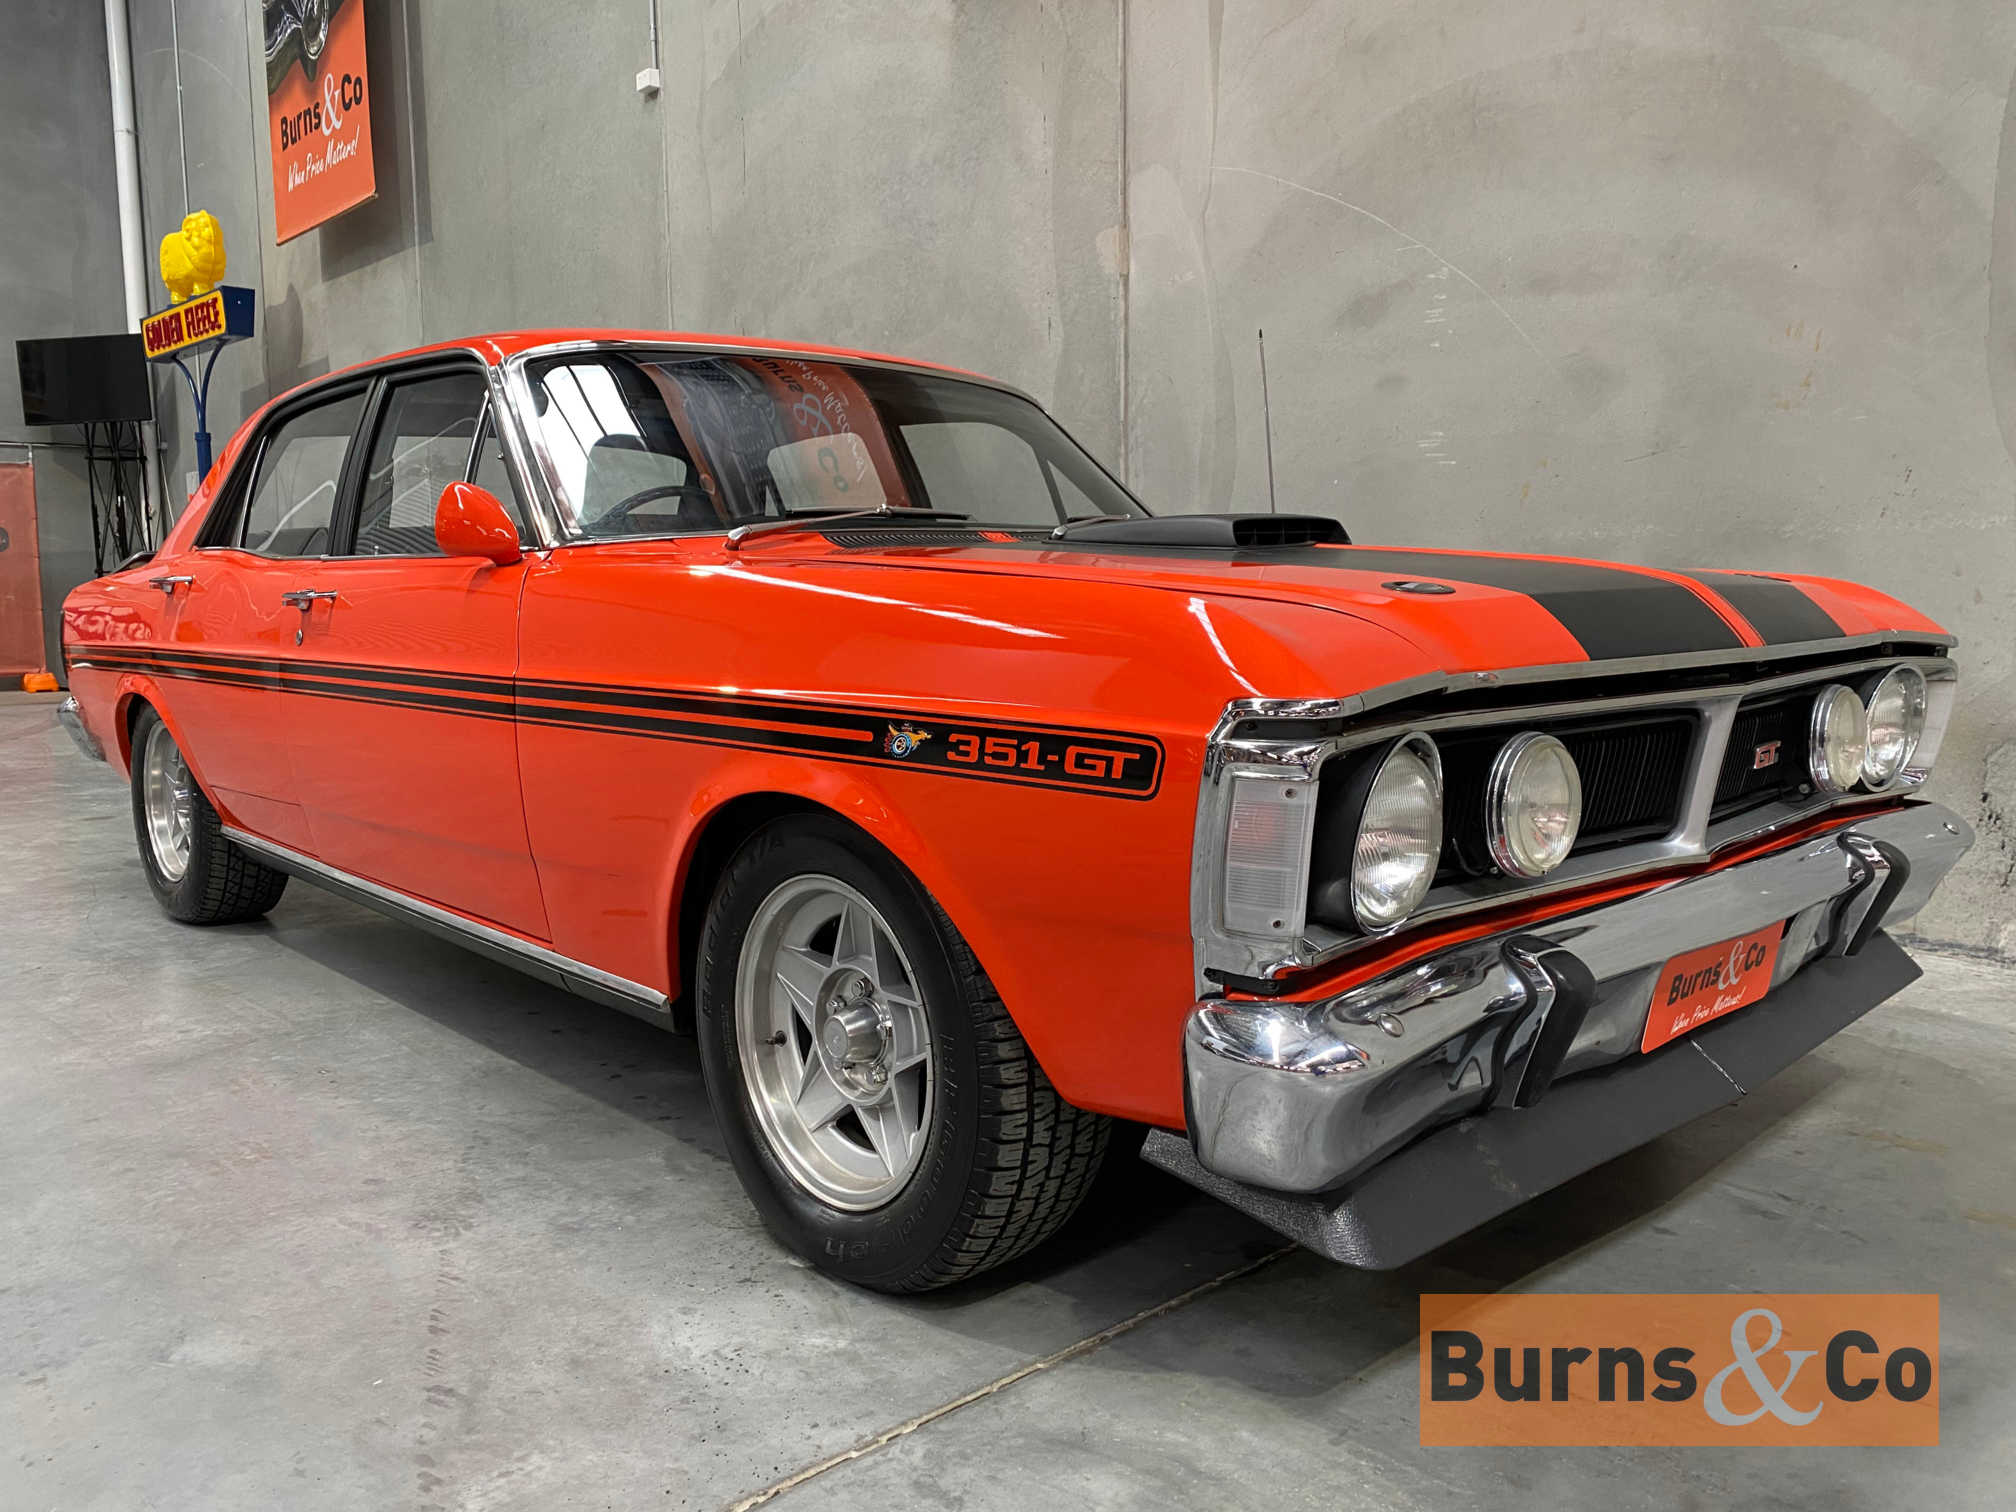 Ford Xy Falcon Gt Wallpapers